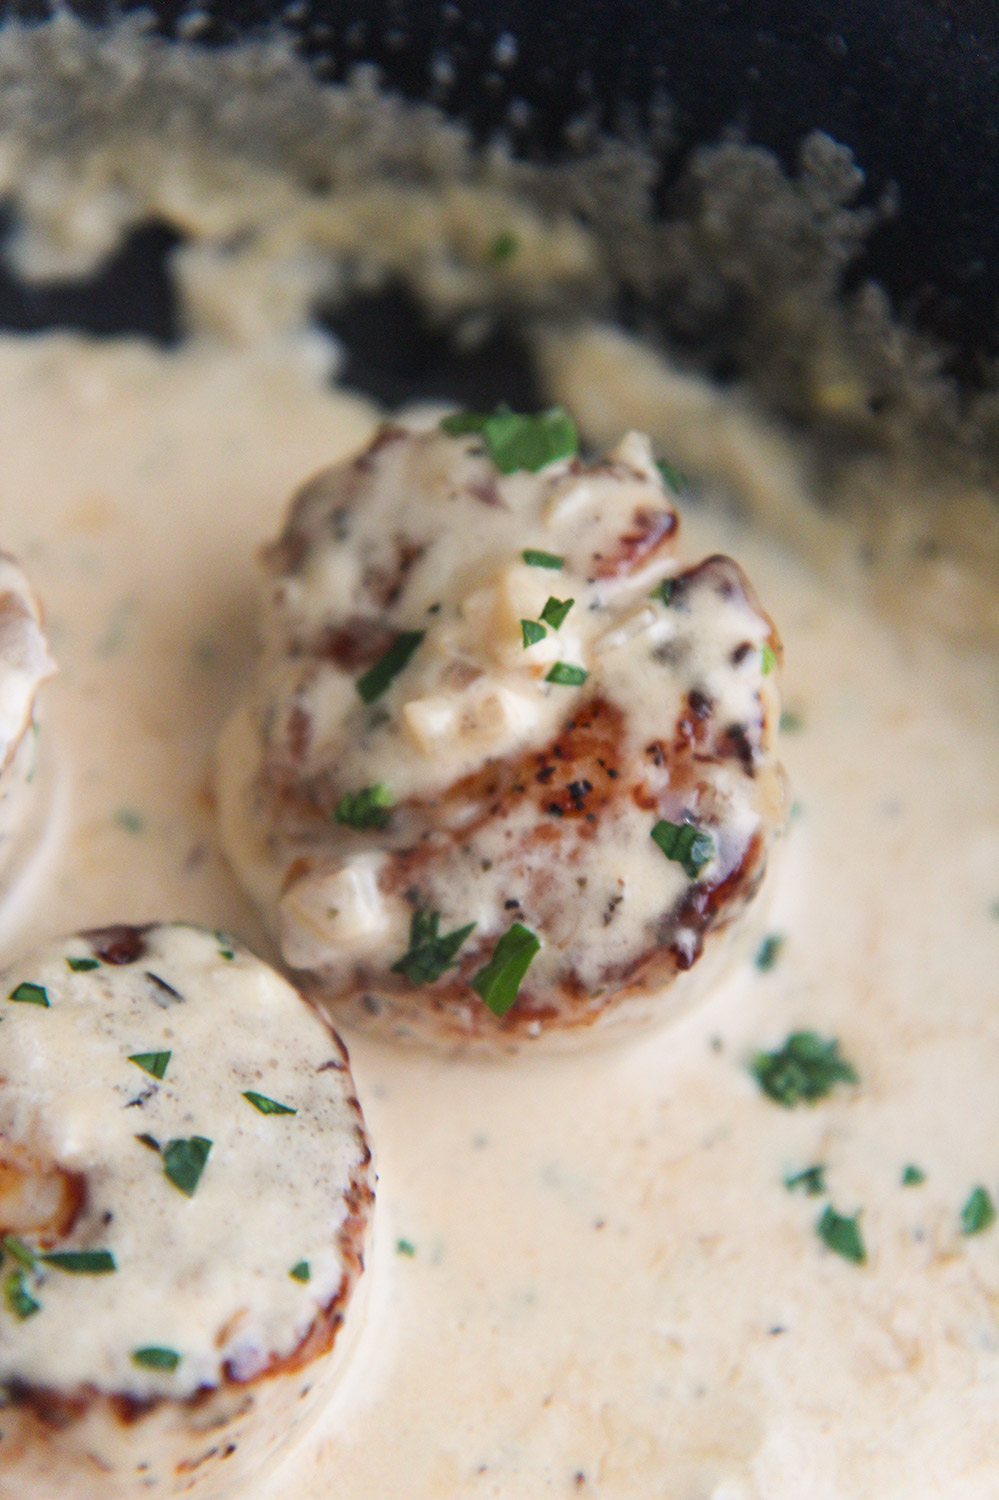 2 scallops tossed in cream sauce and garnished with fresh parsley.